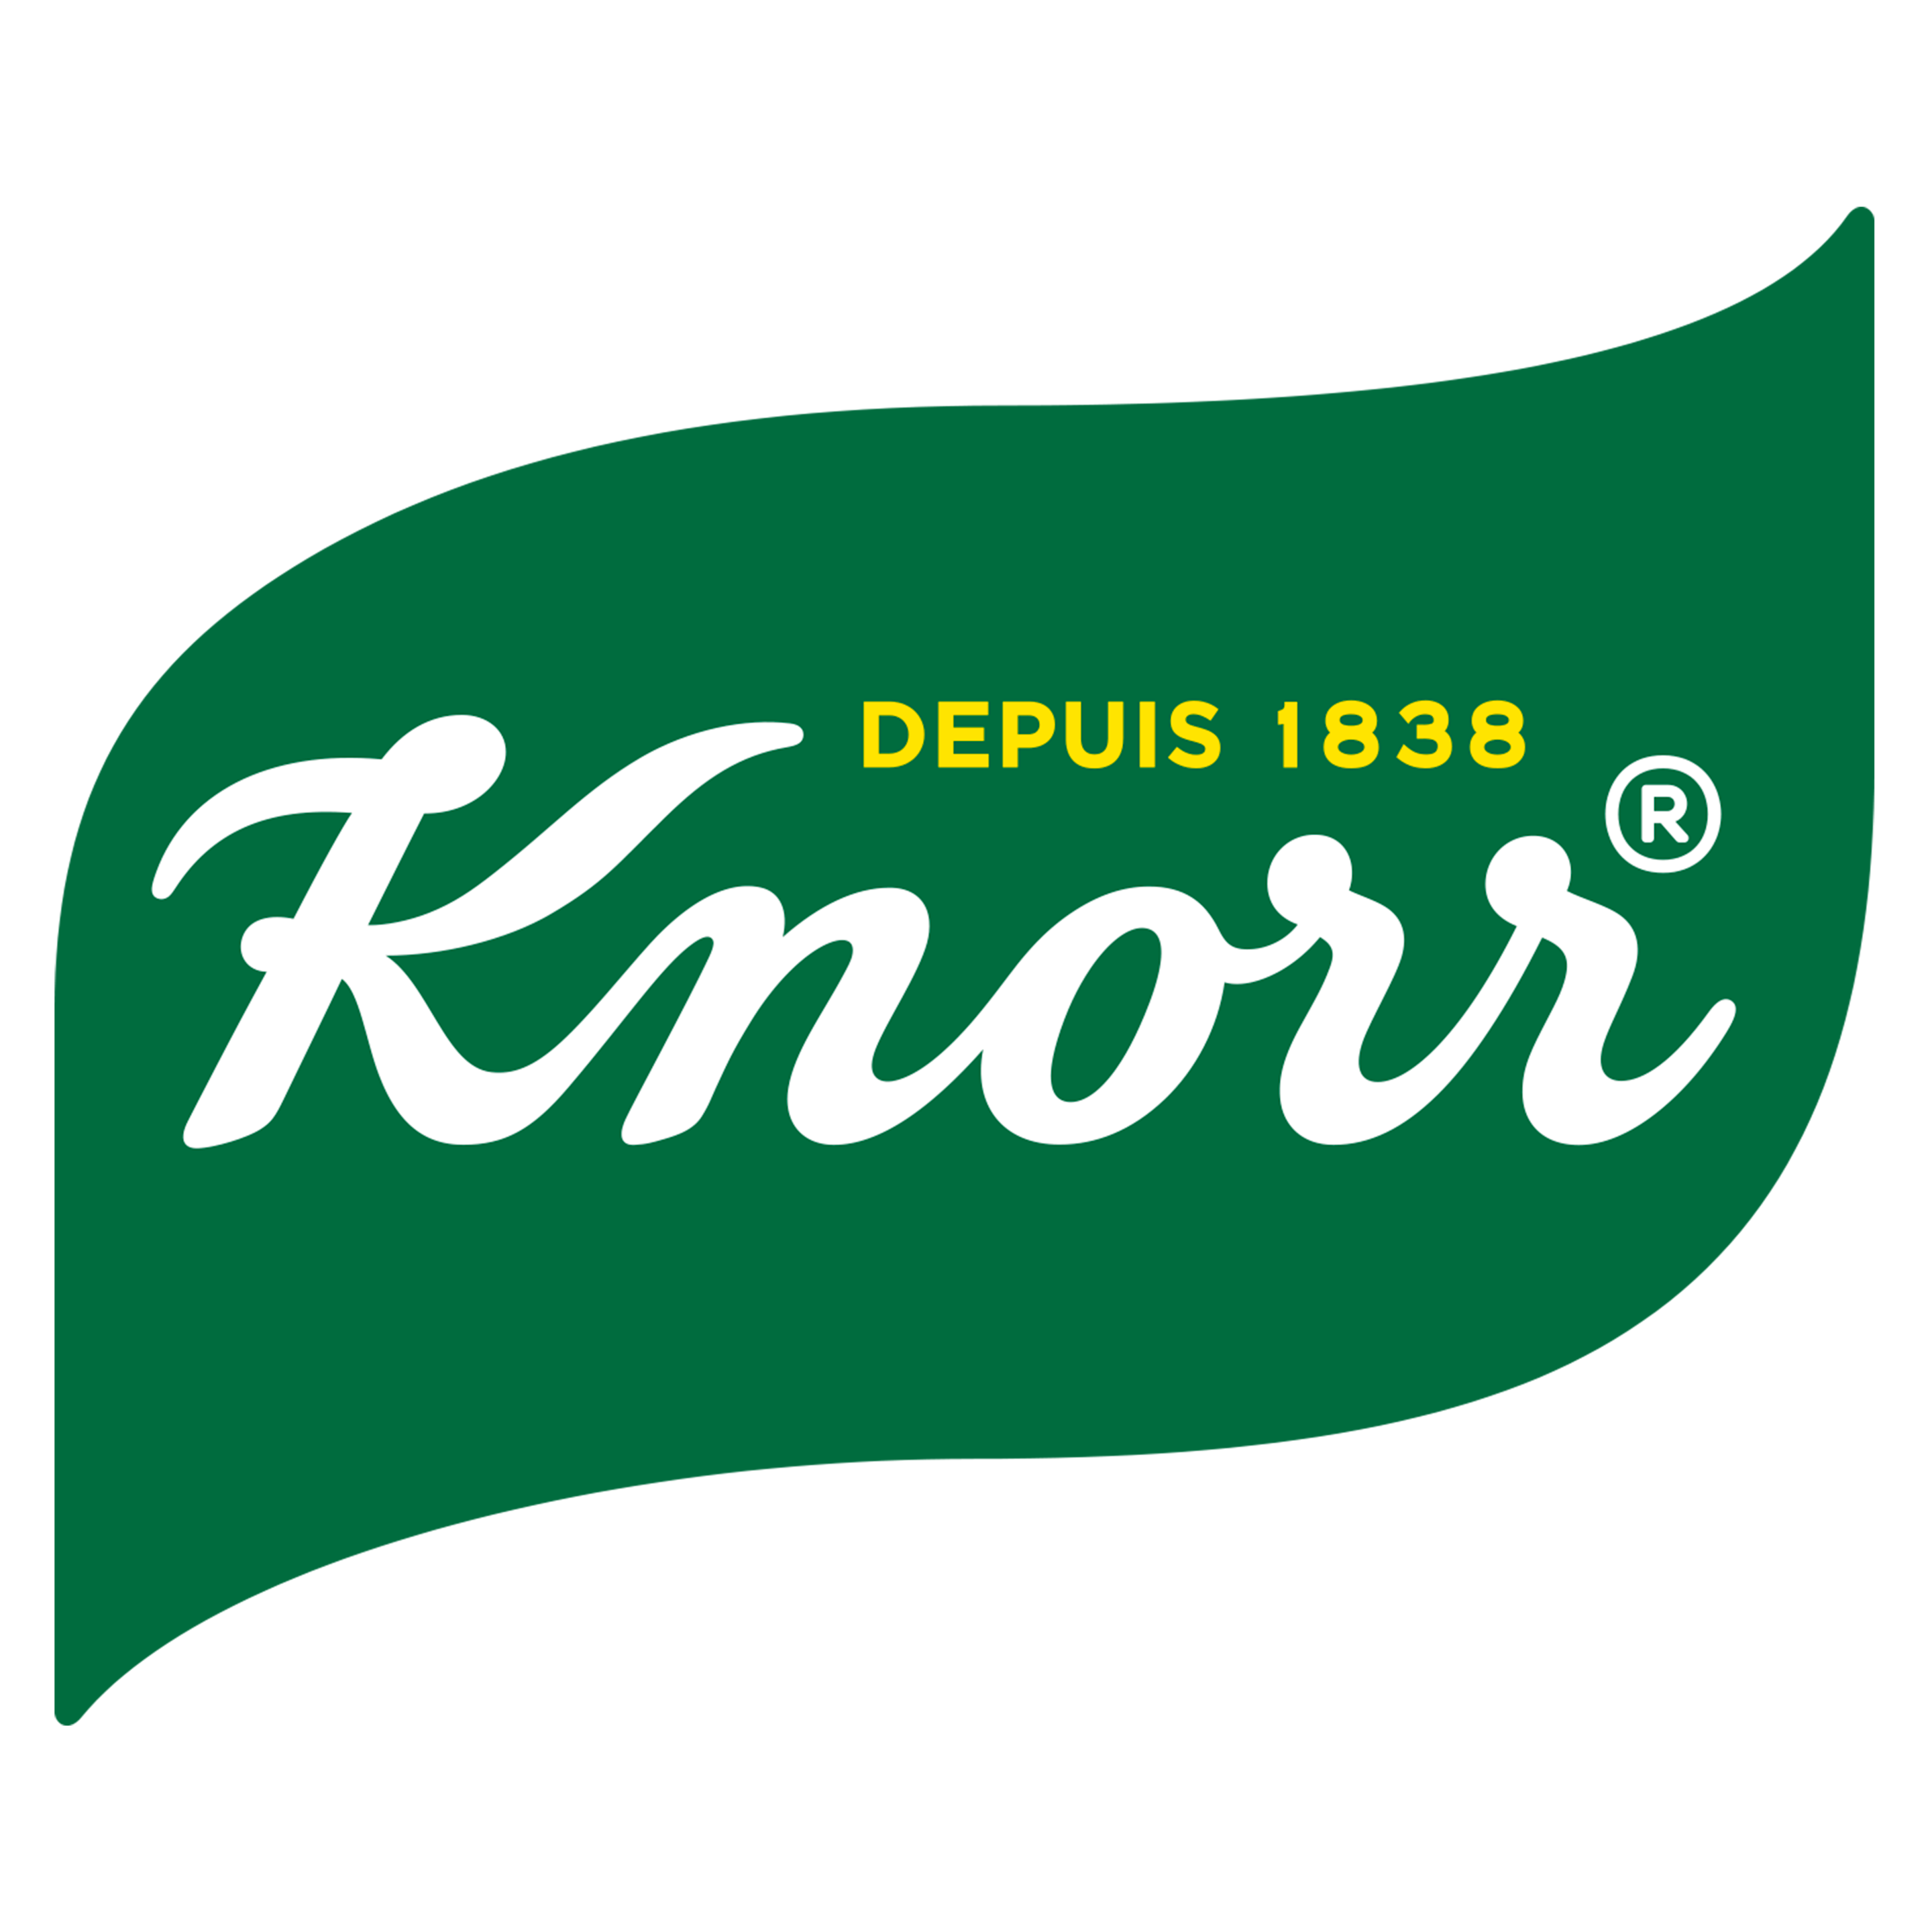 Link to Home Page - Knorr Logo